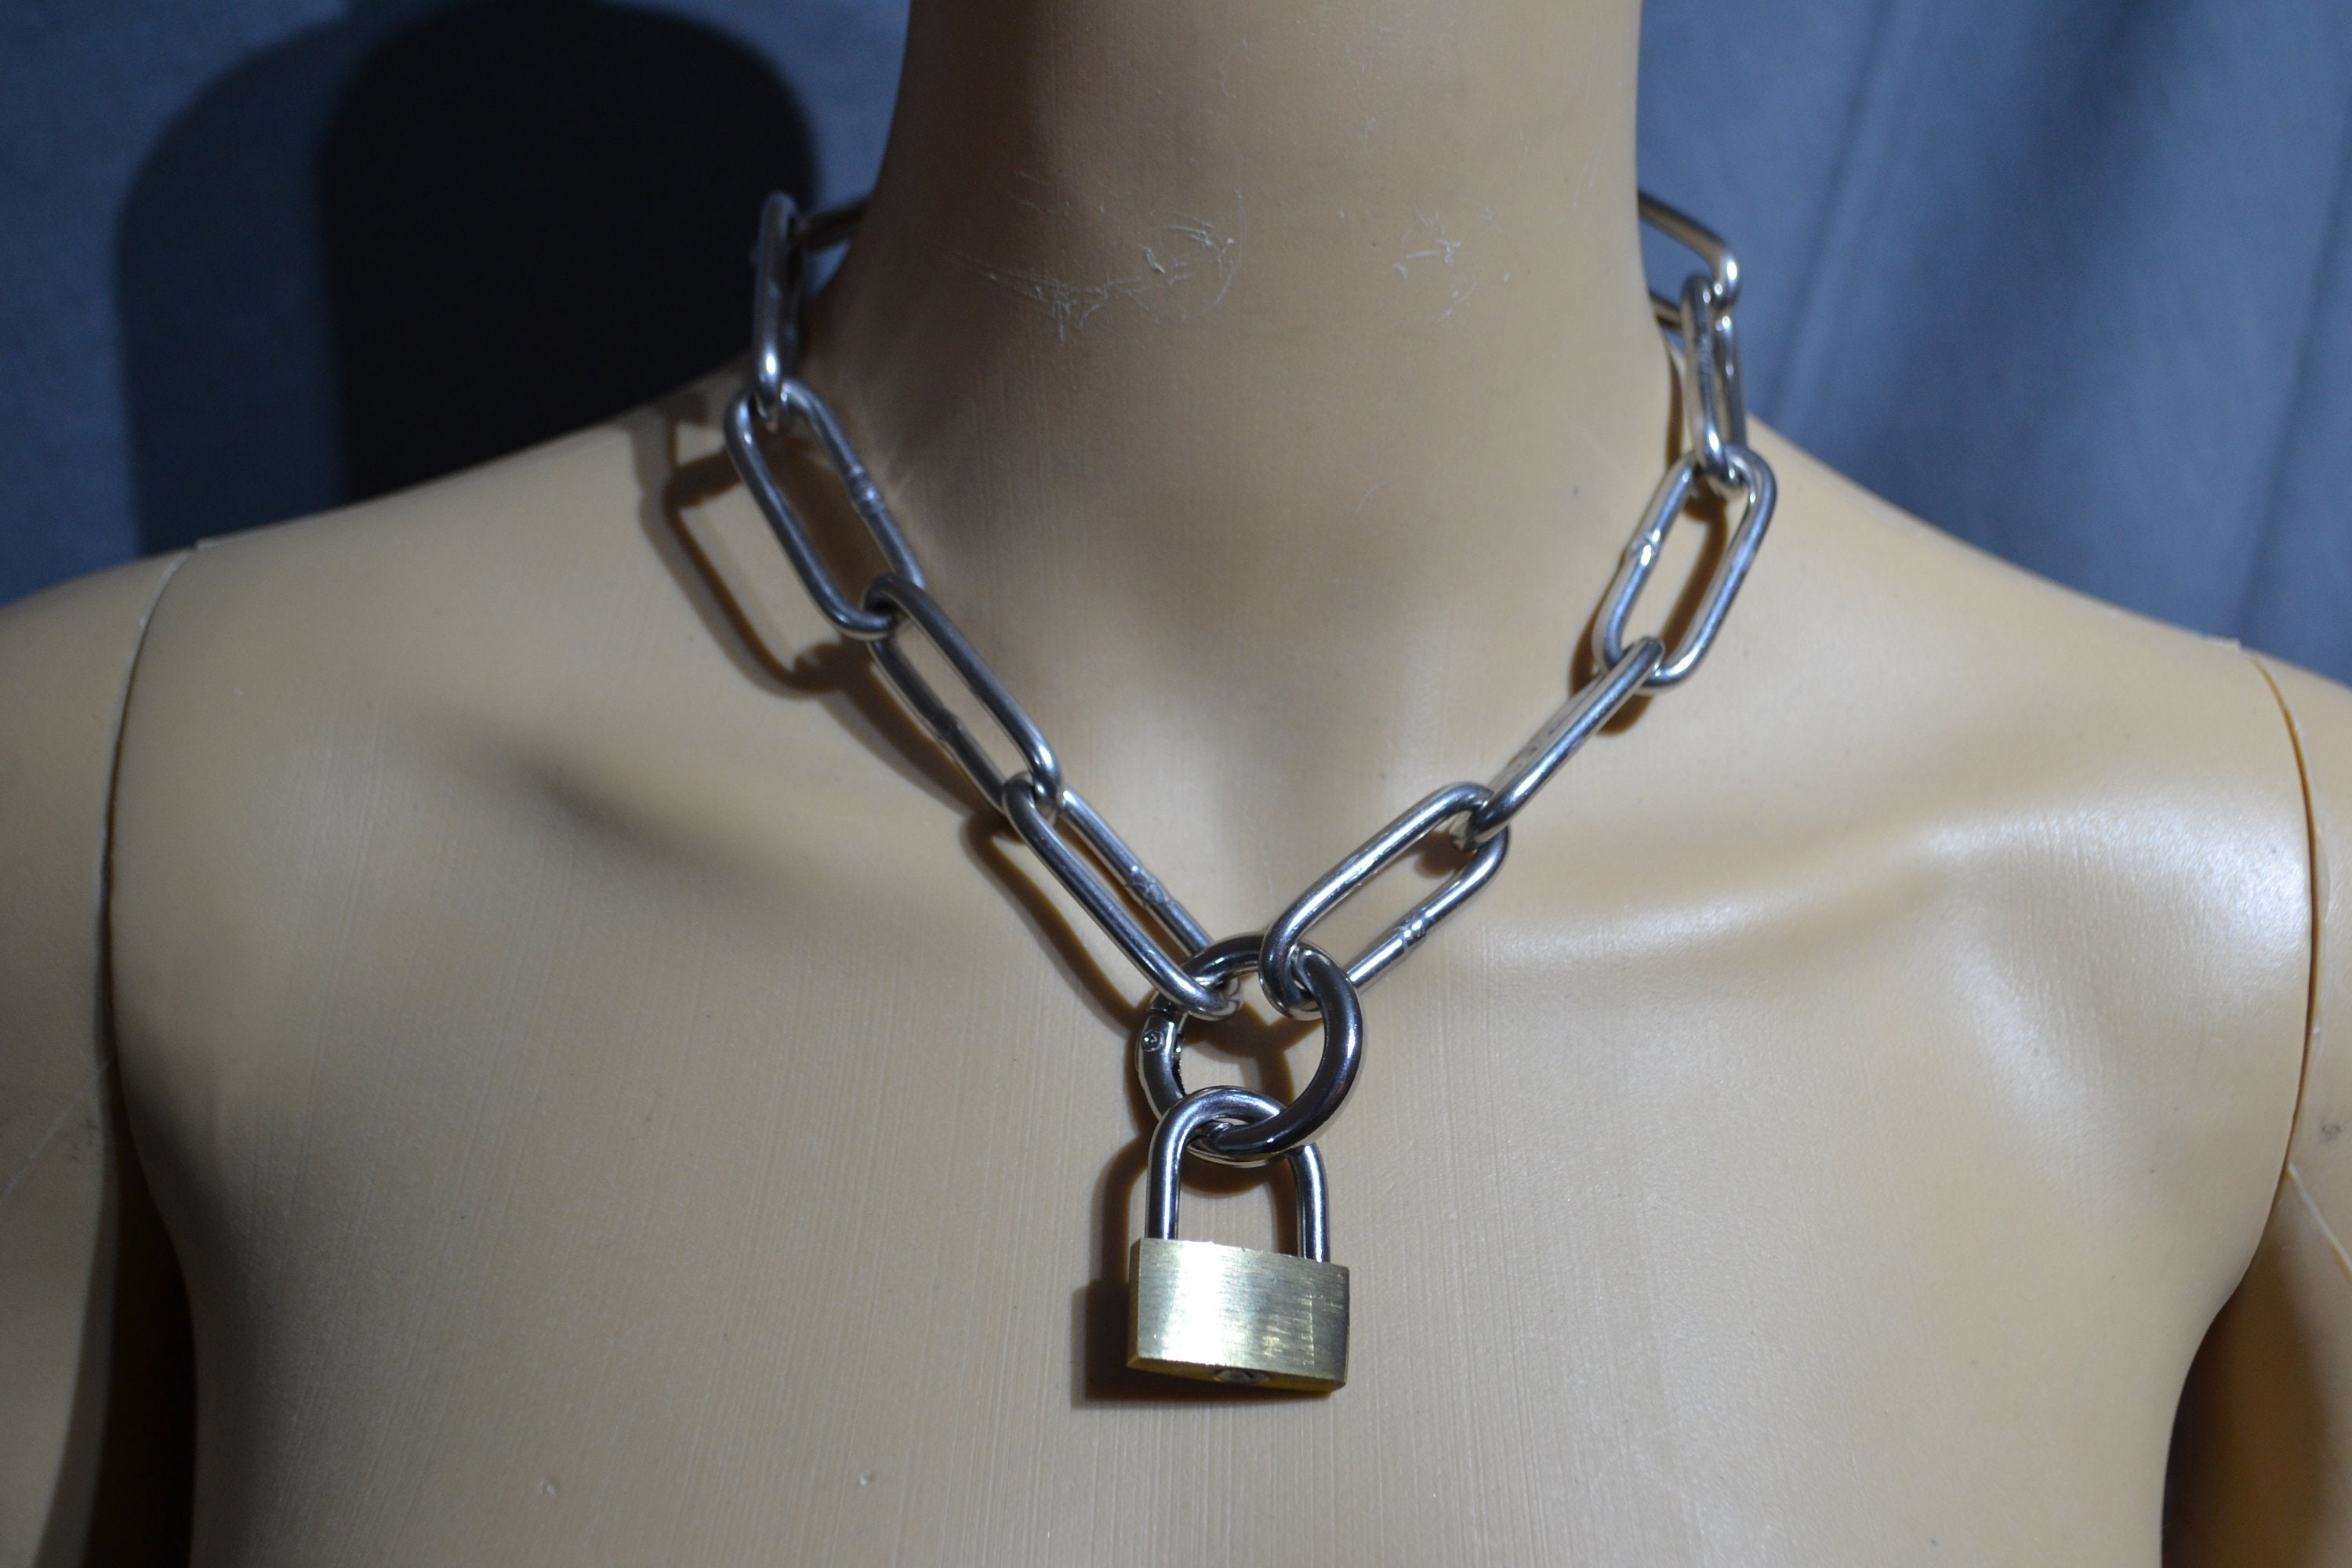 Double Gold Padlock Chain Necklace - Punk jewellery - Grunge style  jewellery - Stainless steel necklaces - alternative